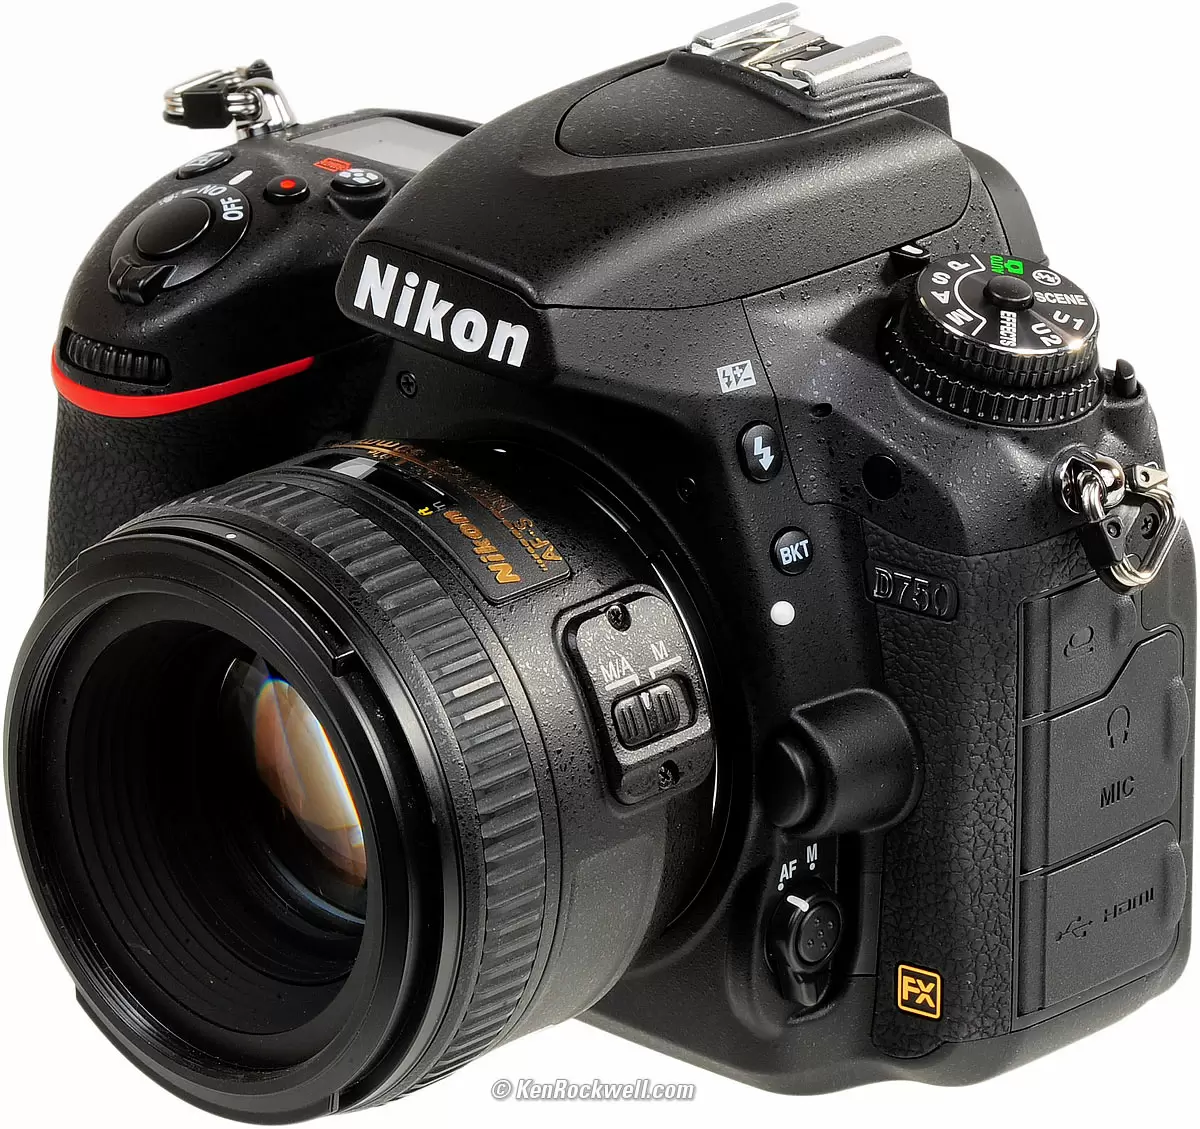 Nikon D750 24-120mm KIT Price in Pakistan, Specifications, Features